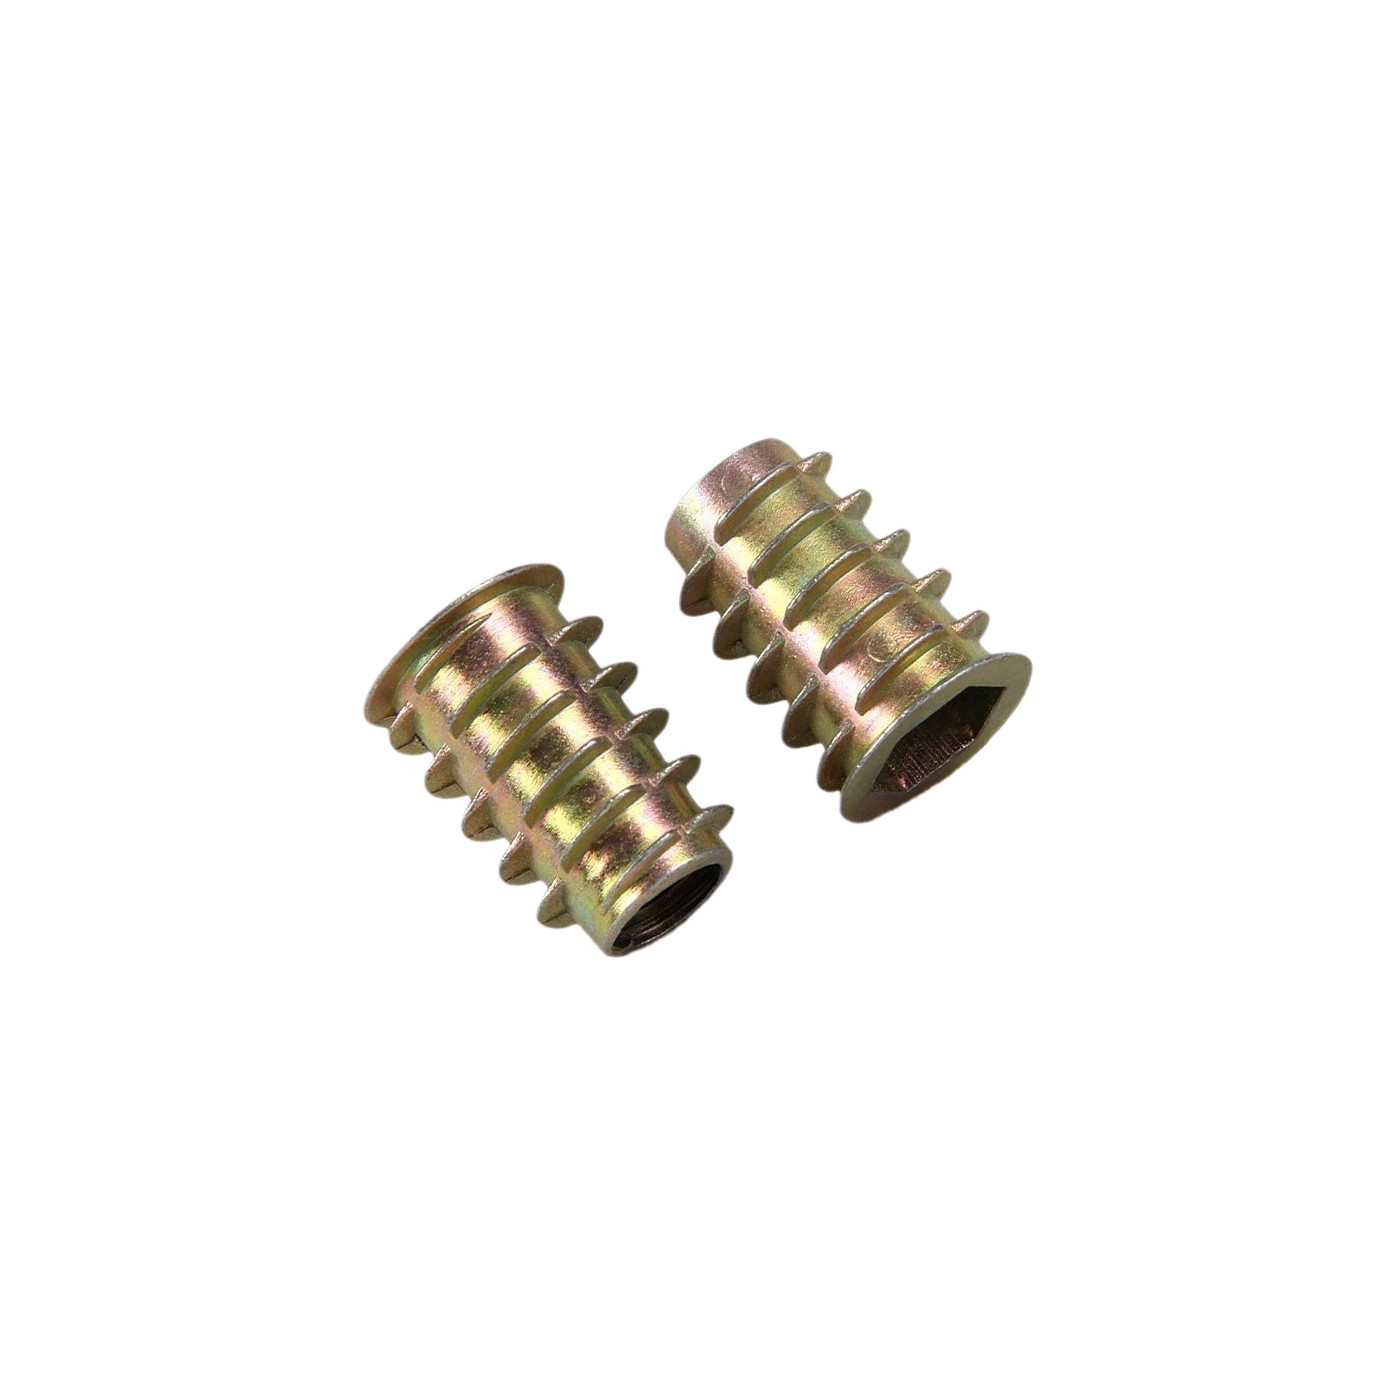 Set of 50 threaded inserts (screw-in nuts, M5x10 mm)